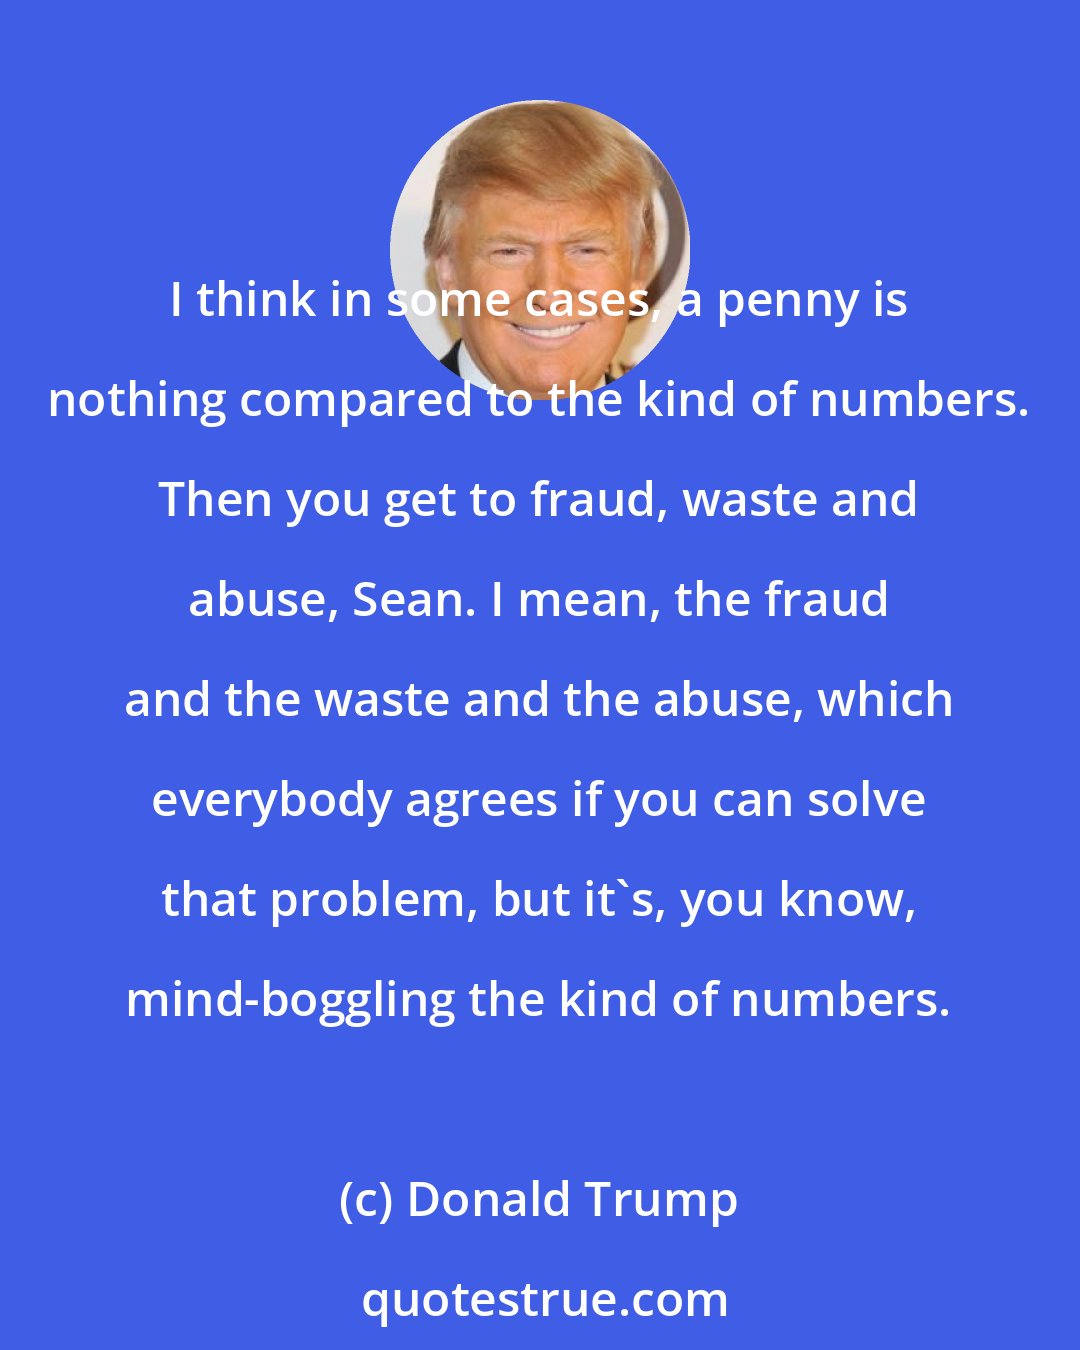 Donald Trump: I think in some cases, a penny is nothing compared to the kind of numbers. Then you get to fraud, waste and abuse, Sean. I mean, the fraud and the waste and the abuse, which everybody agrees if you can solve that problem, but it's, you know, mind-boggling the kind of numbers.